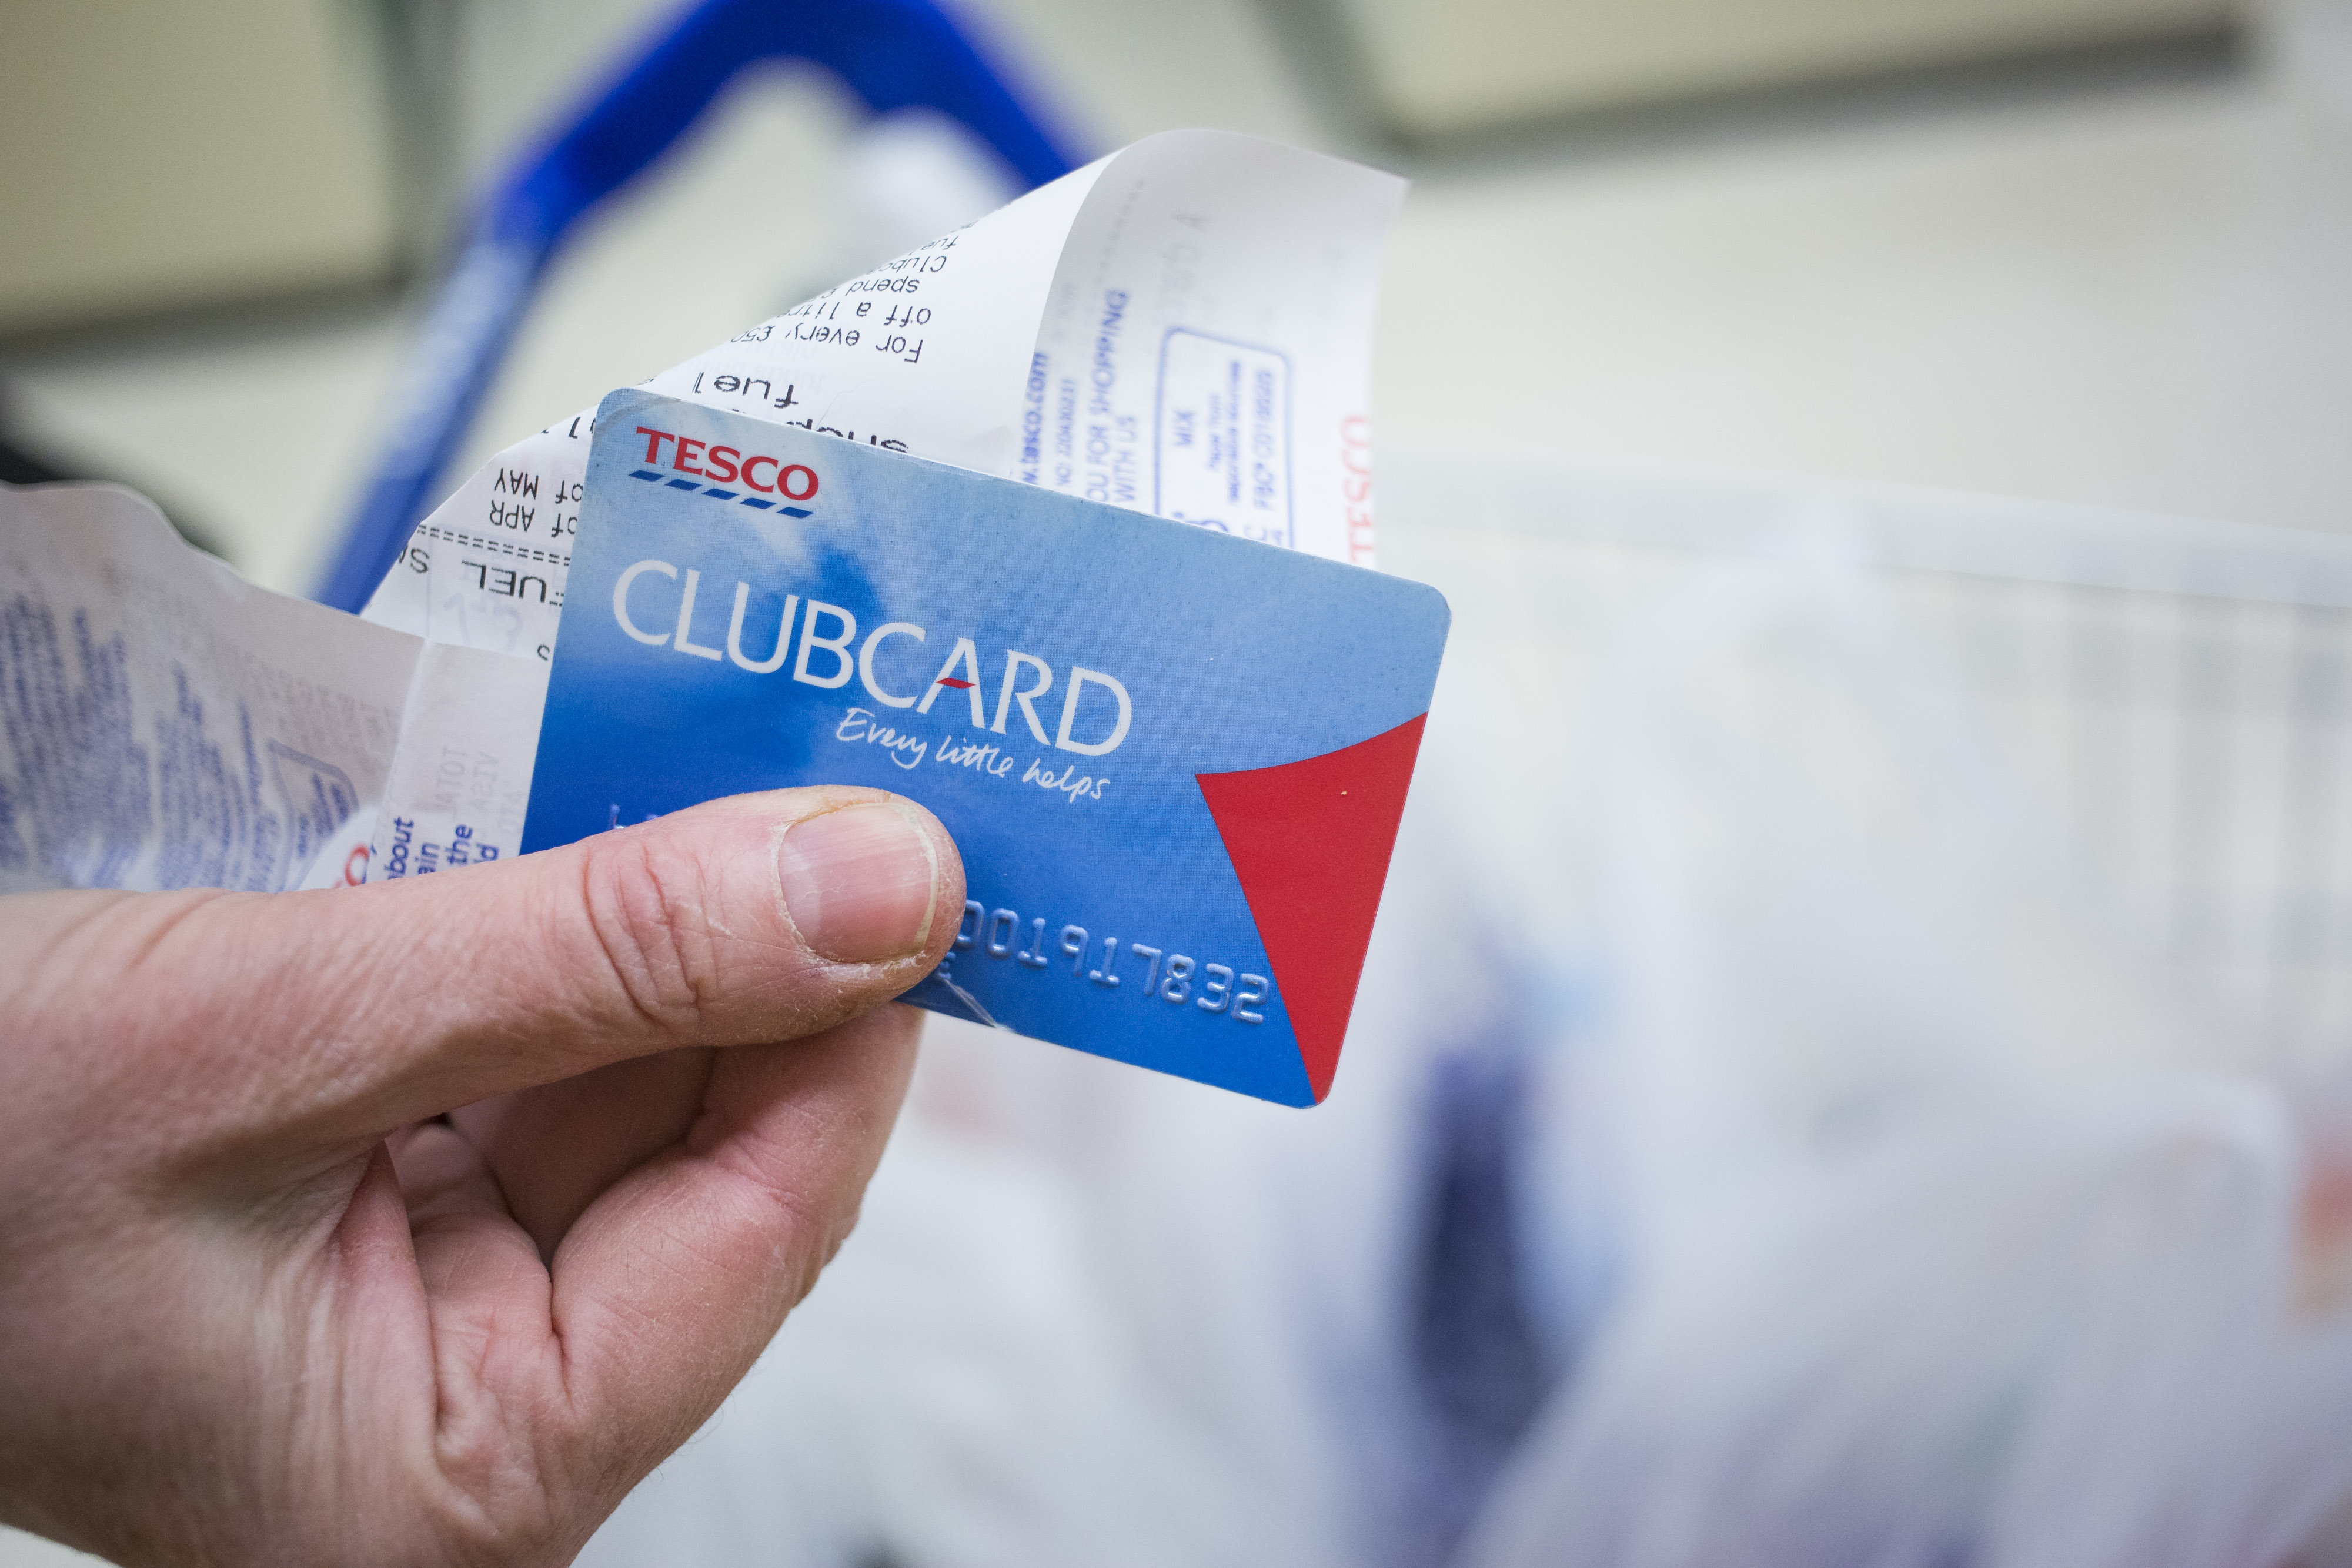 Shoppers only have to follow four simple steps to earn their extra Clubcard points